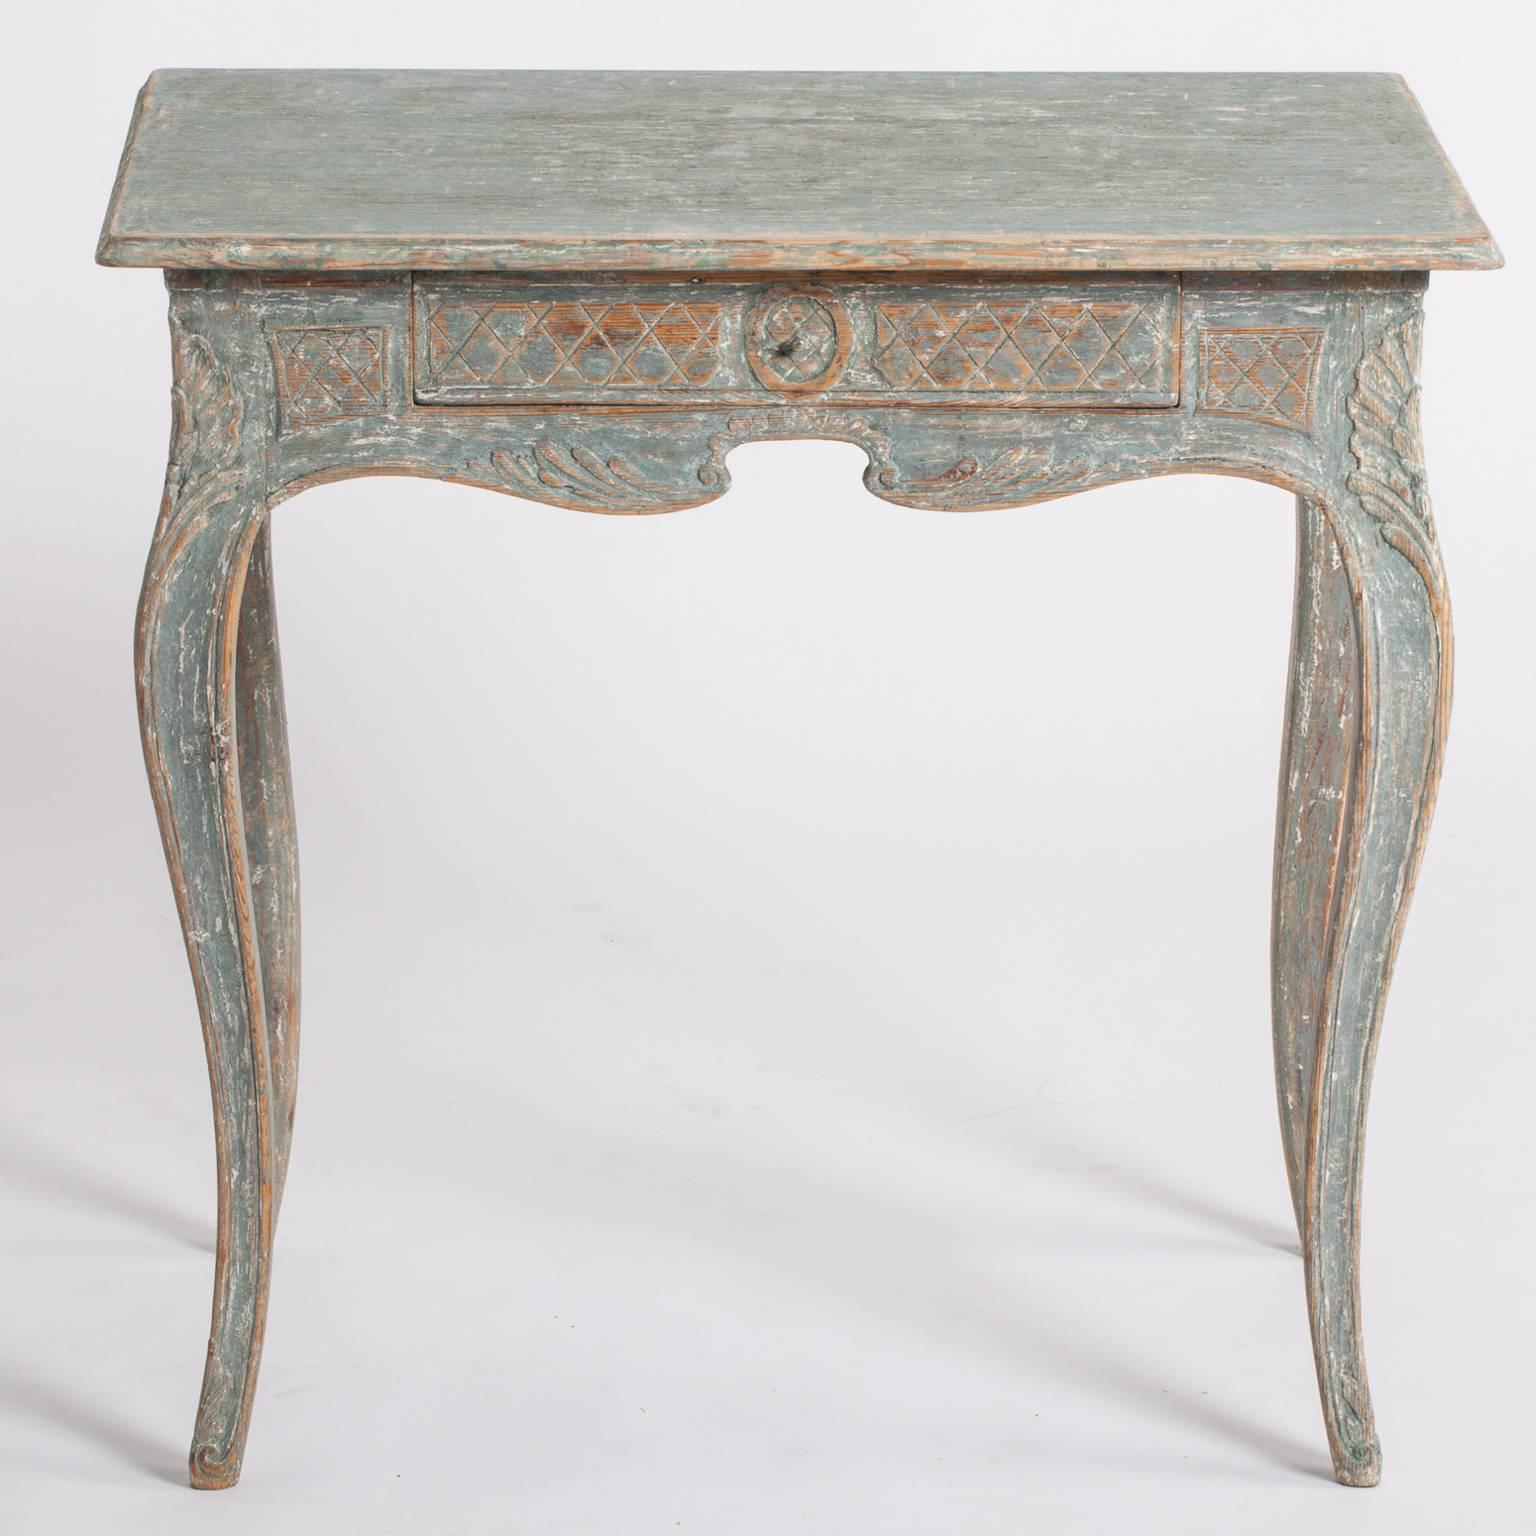 This very special console table in original Swedish blue/green paint has beautifully detailed carvings in a basket weave pattern on all sides and a drawer in the front. This is an unusual feature allowing it to be free standing in a room. The